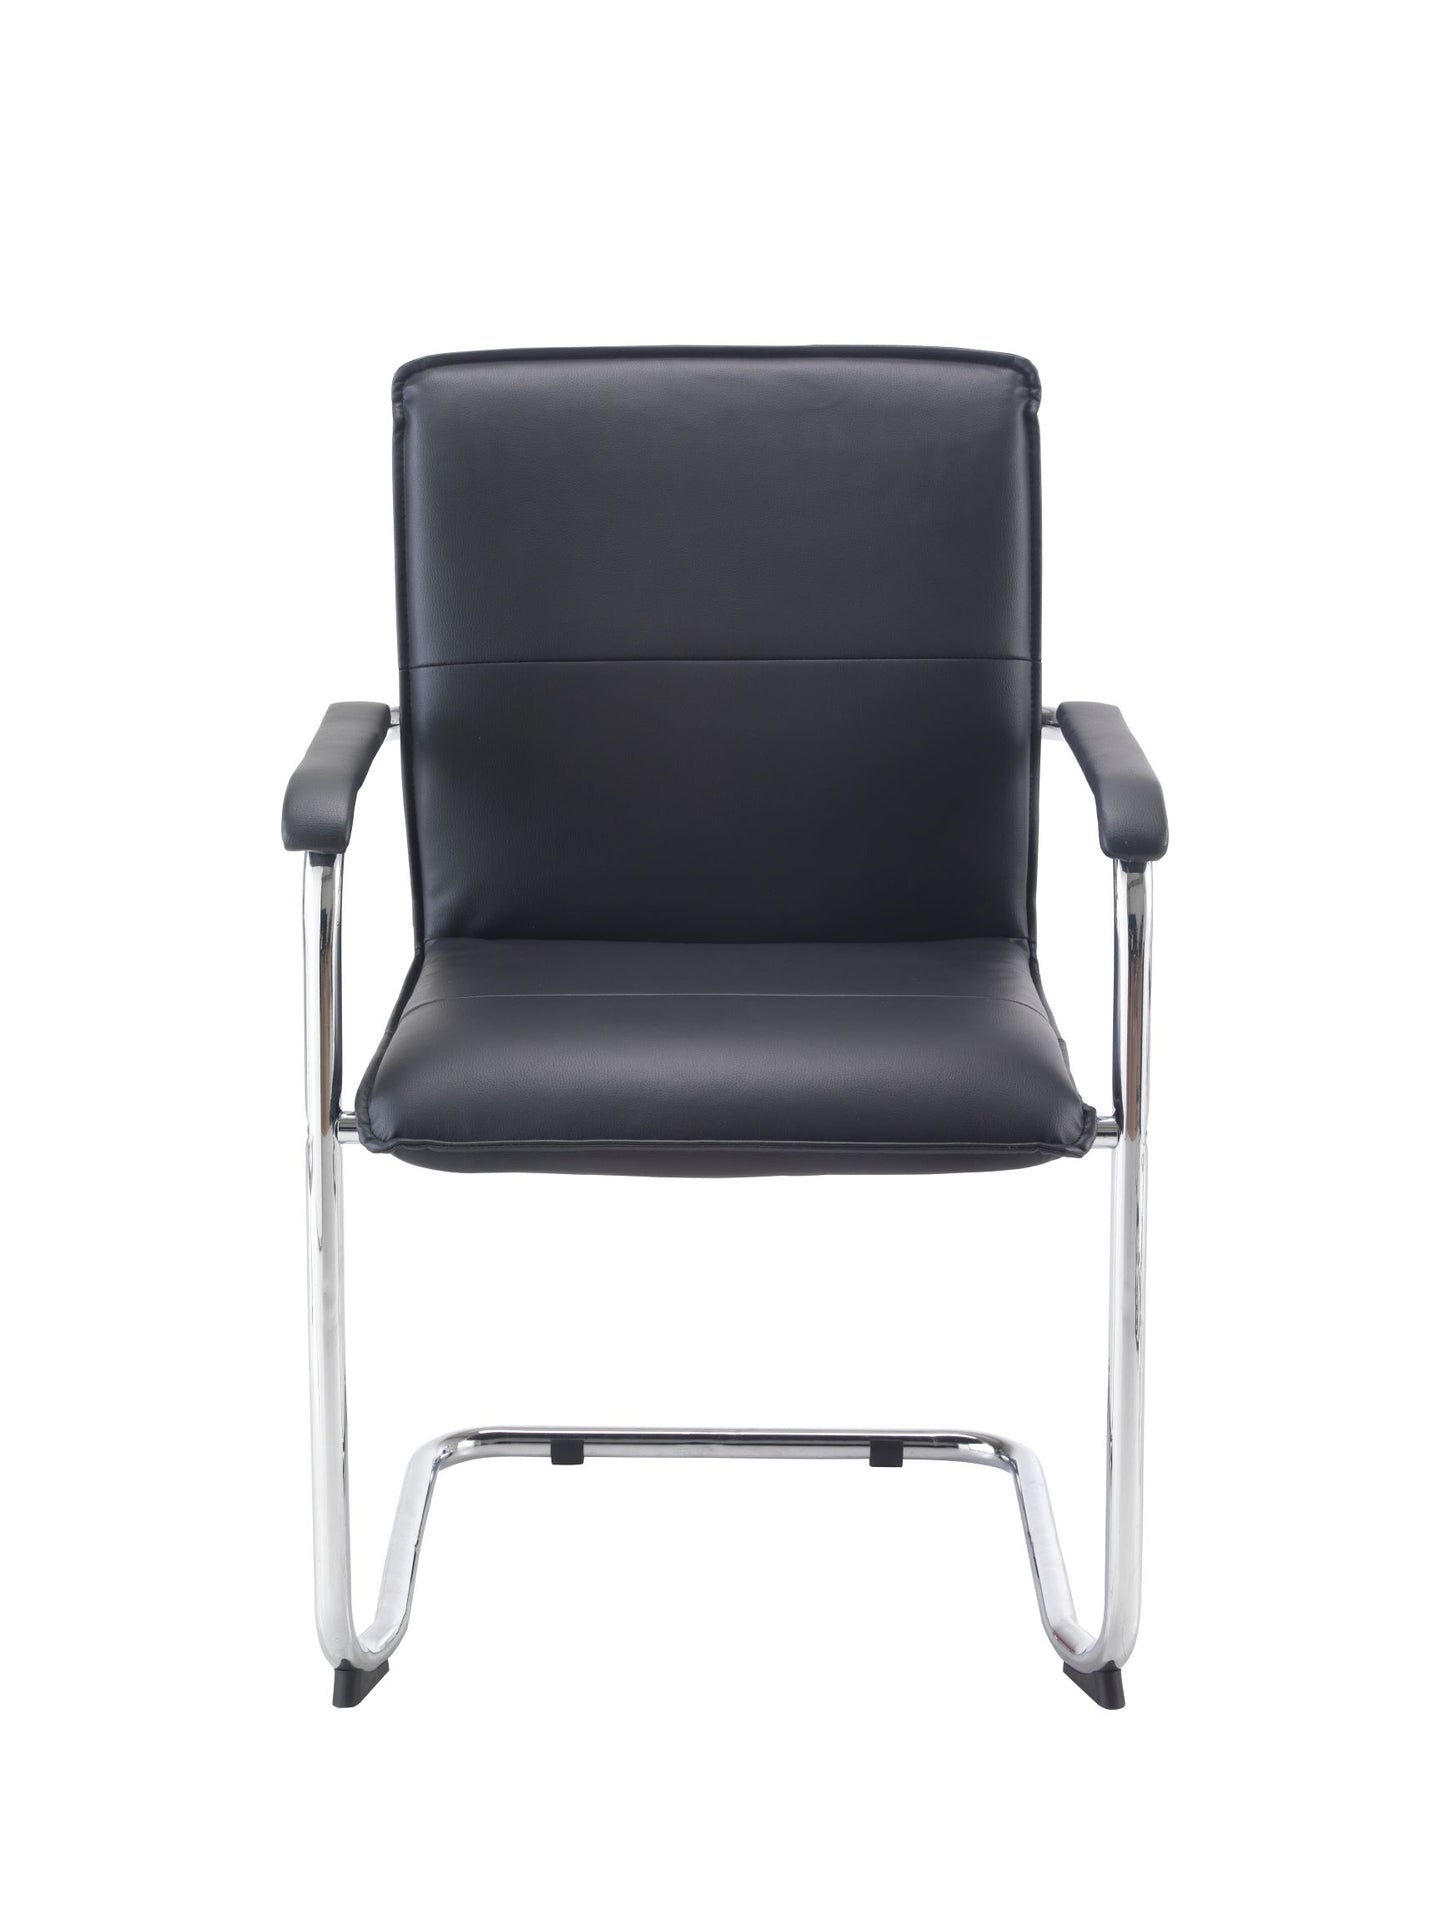 Pavia - Includes FREE Mainland UK Delivery - Minimum order 2 chairs